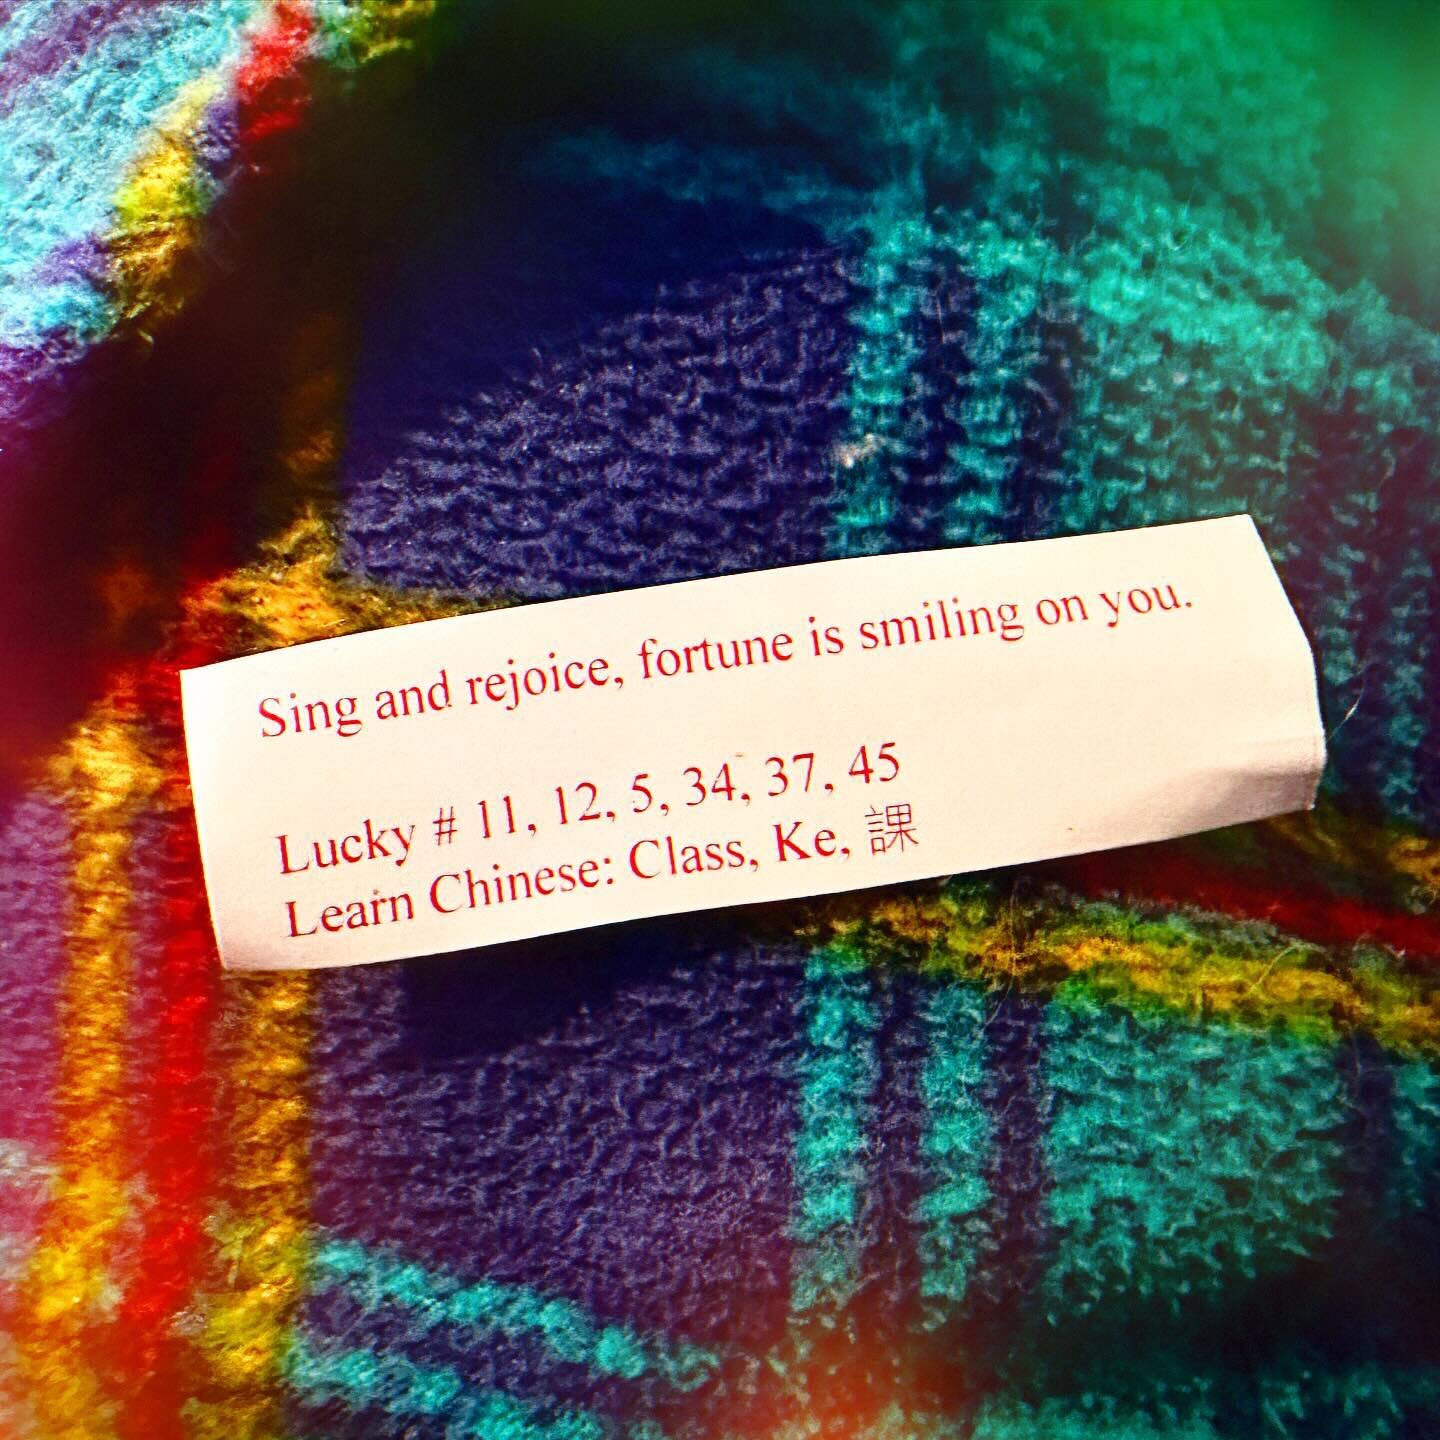 Good fortune! 😁 #fortune #sing #rejoice